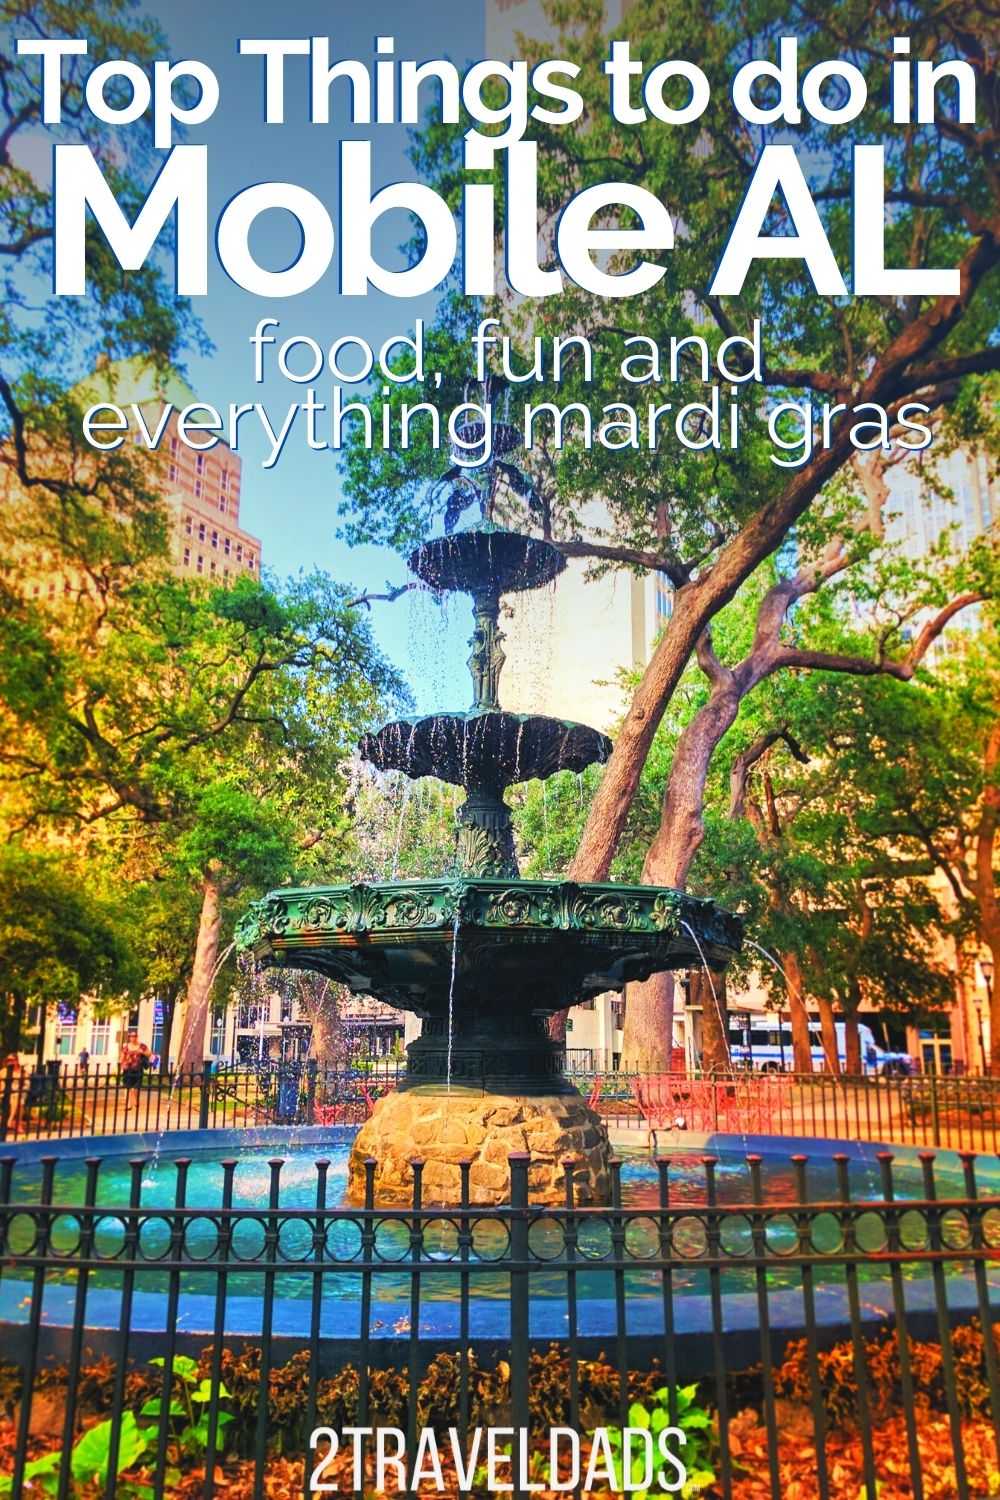 Mobile, Alabama is a fun, mellow alternative to New Orleans. The best things to do in Mobile, Alabama range from walking the wrought iron balcony lined streets to airboat rides to find alligators. So much to do in Mobile!